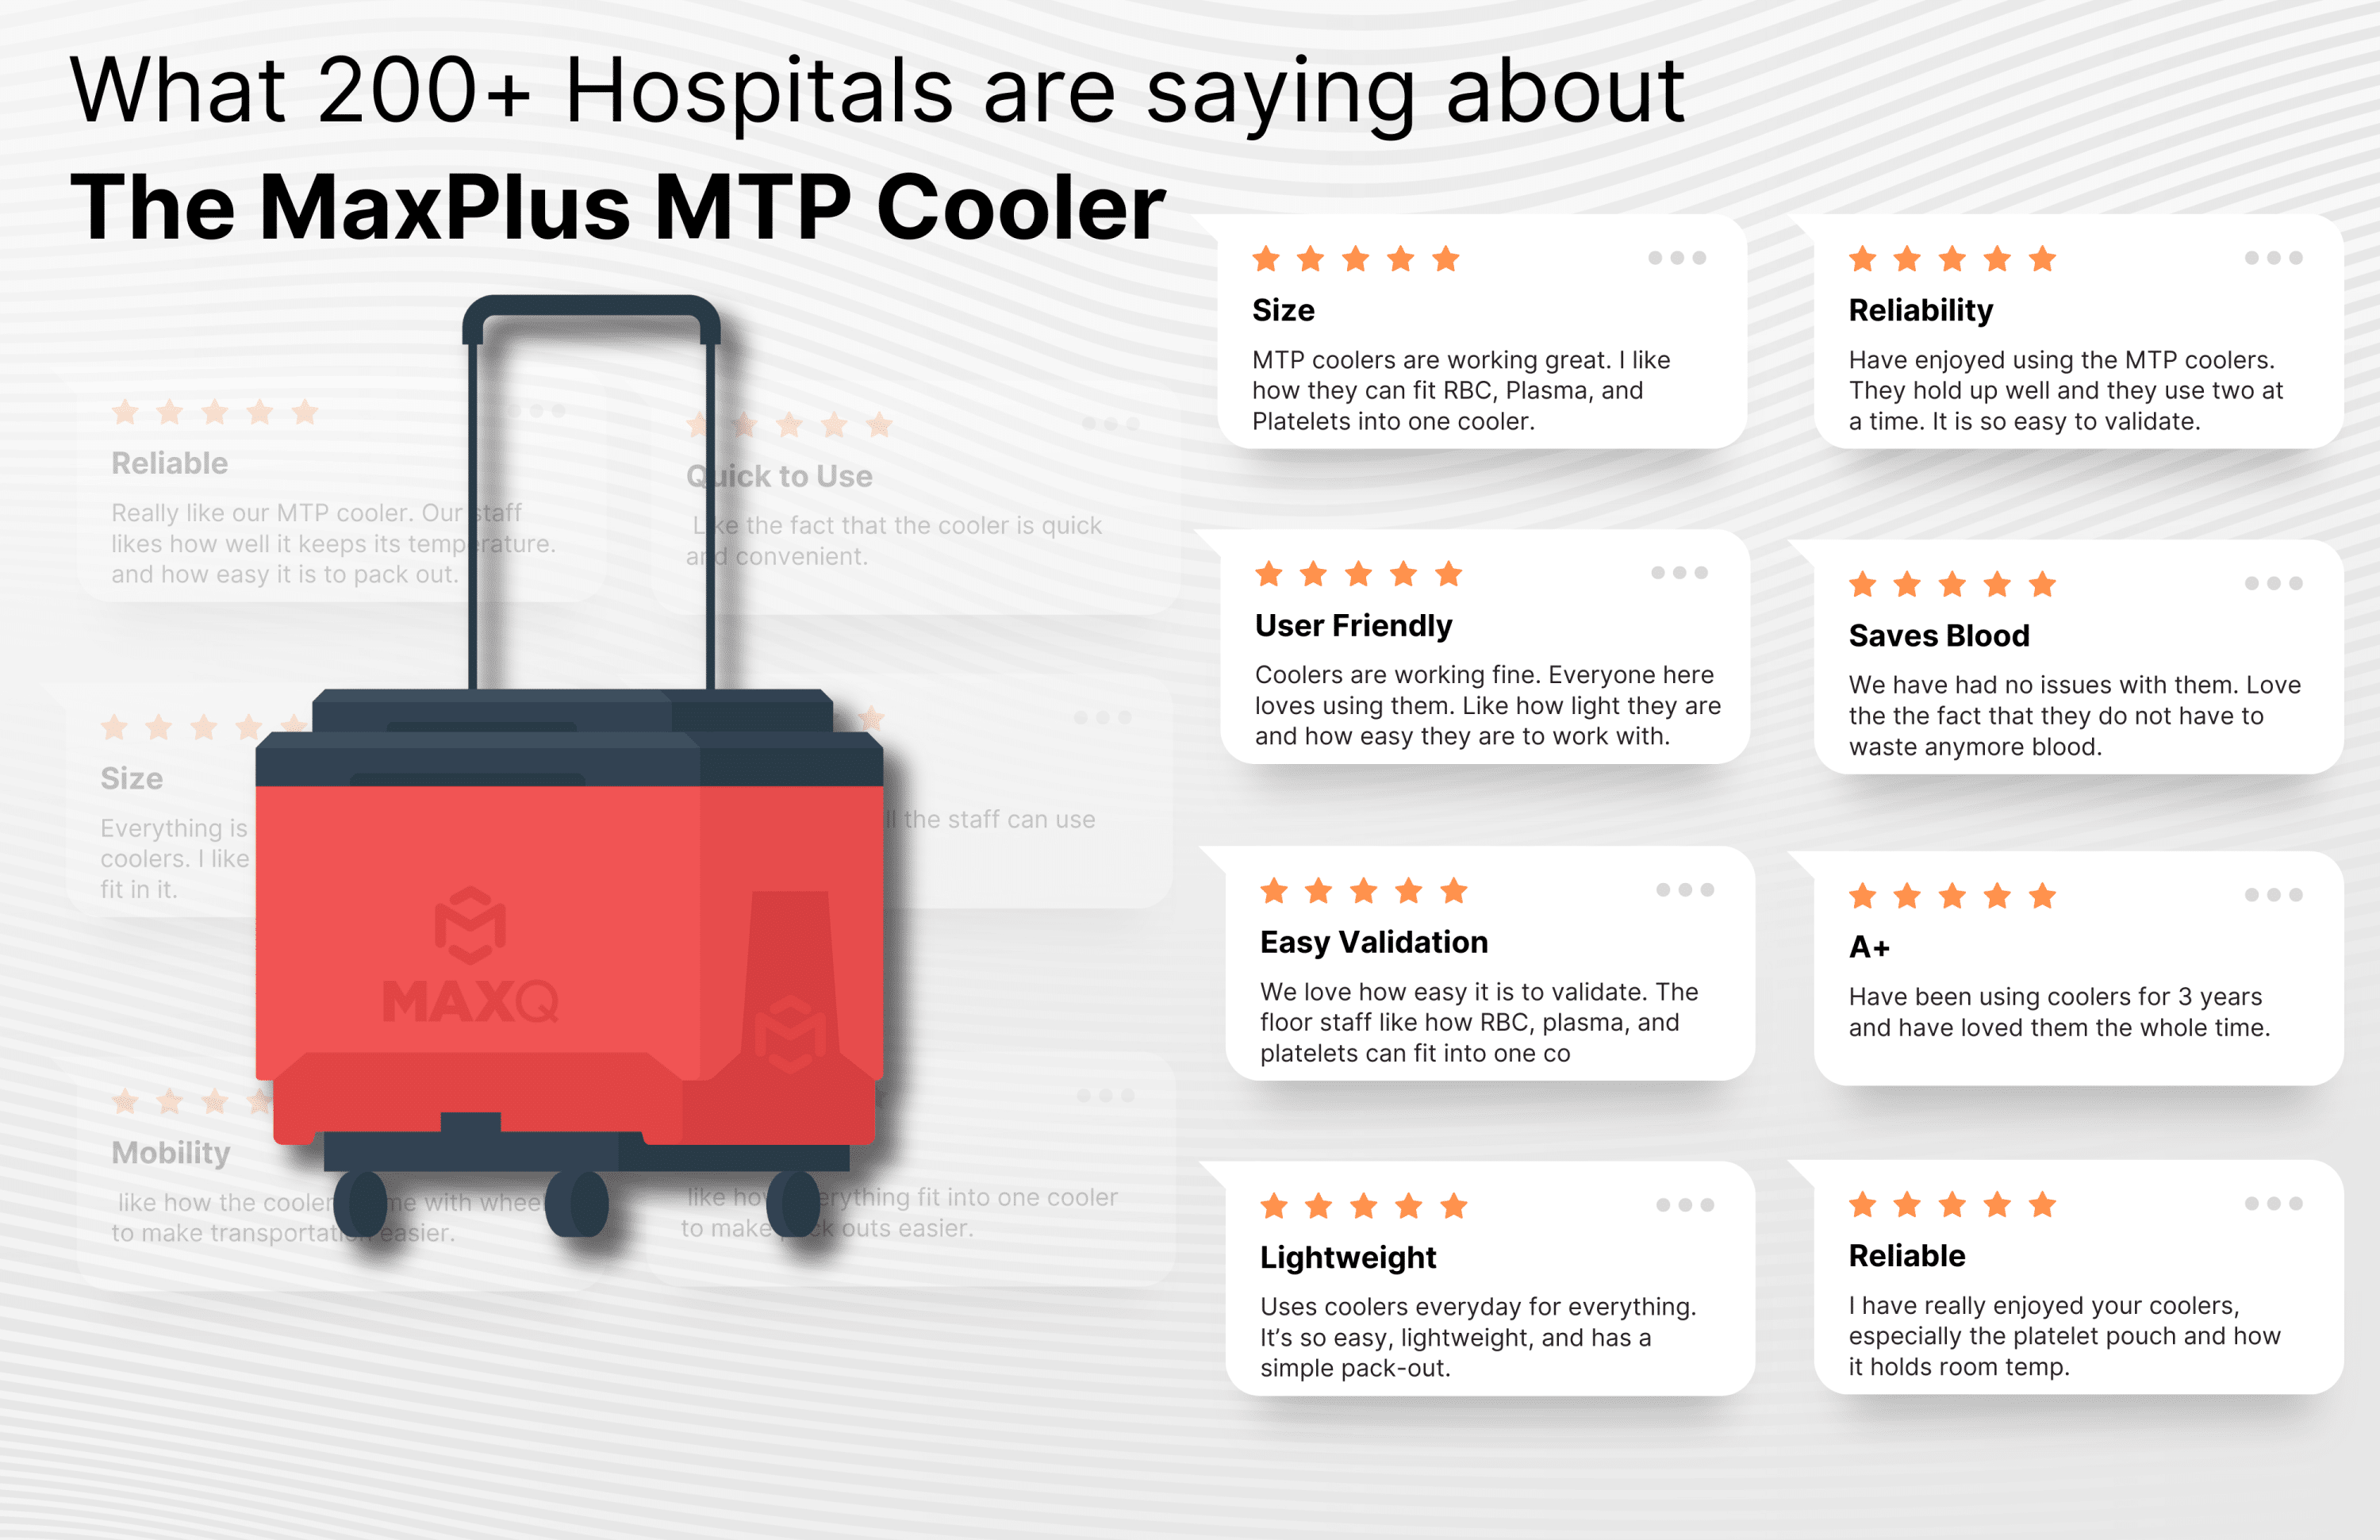 MaxQ MTP Cooler What Hospitals are Saying